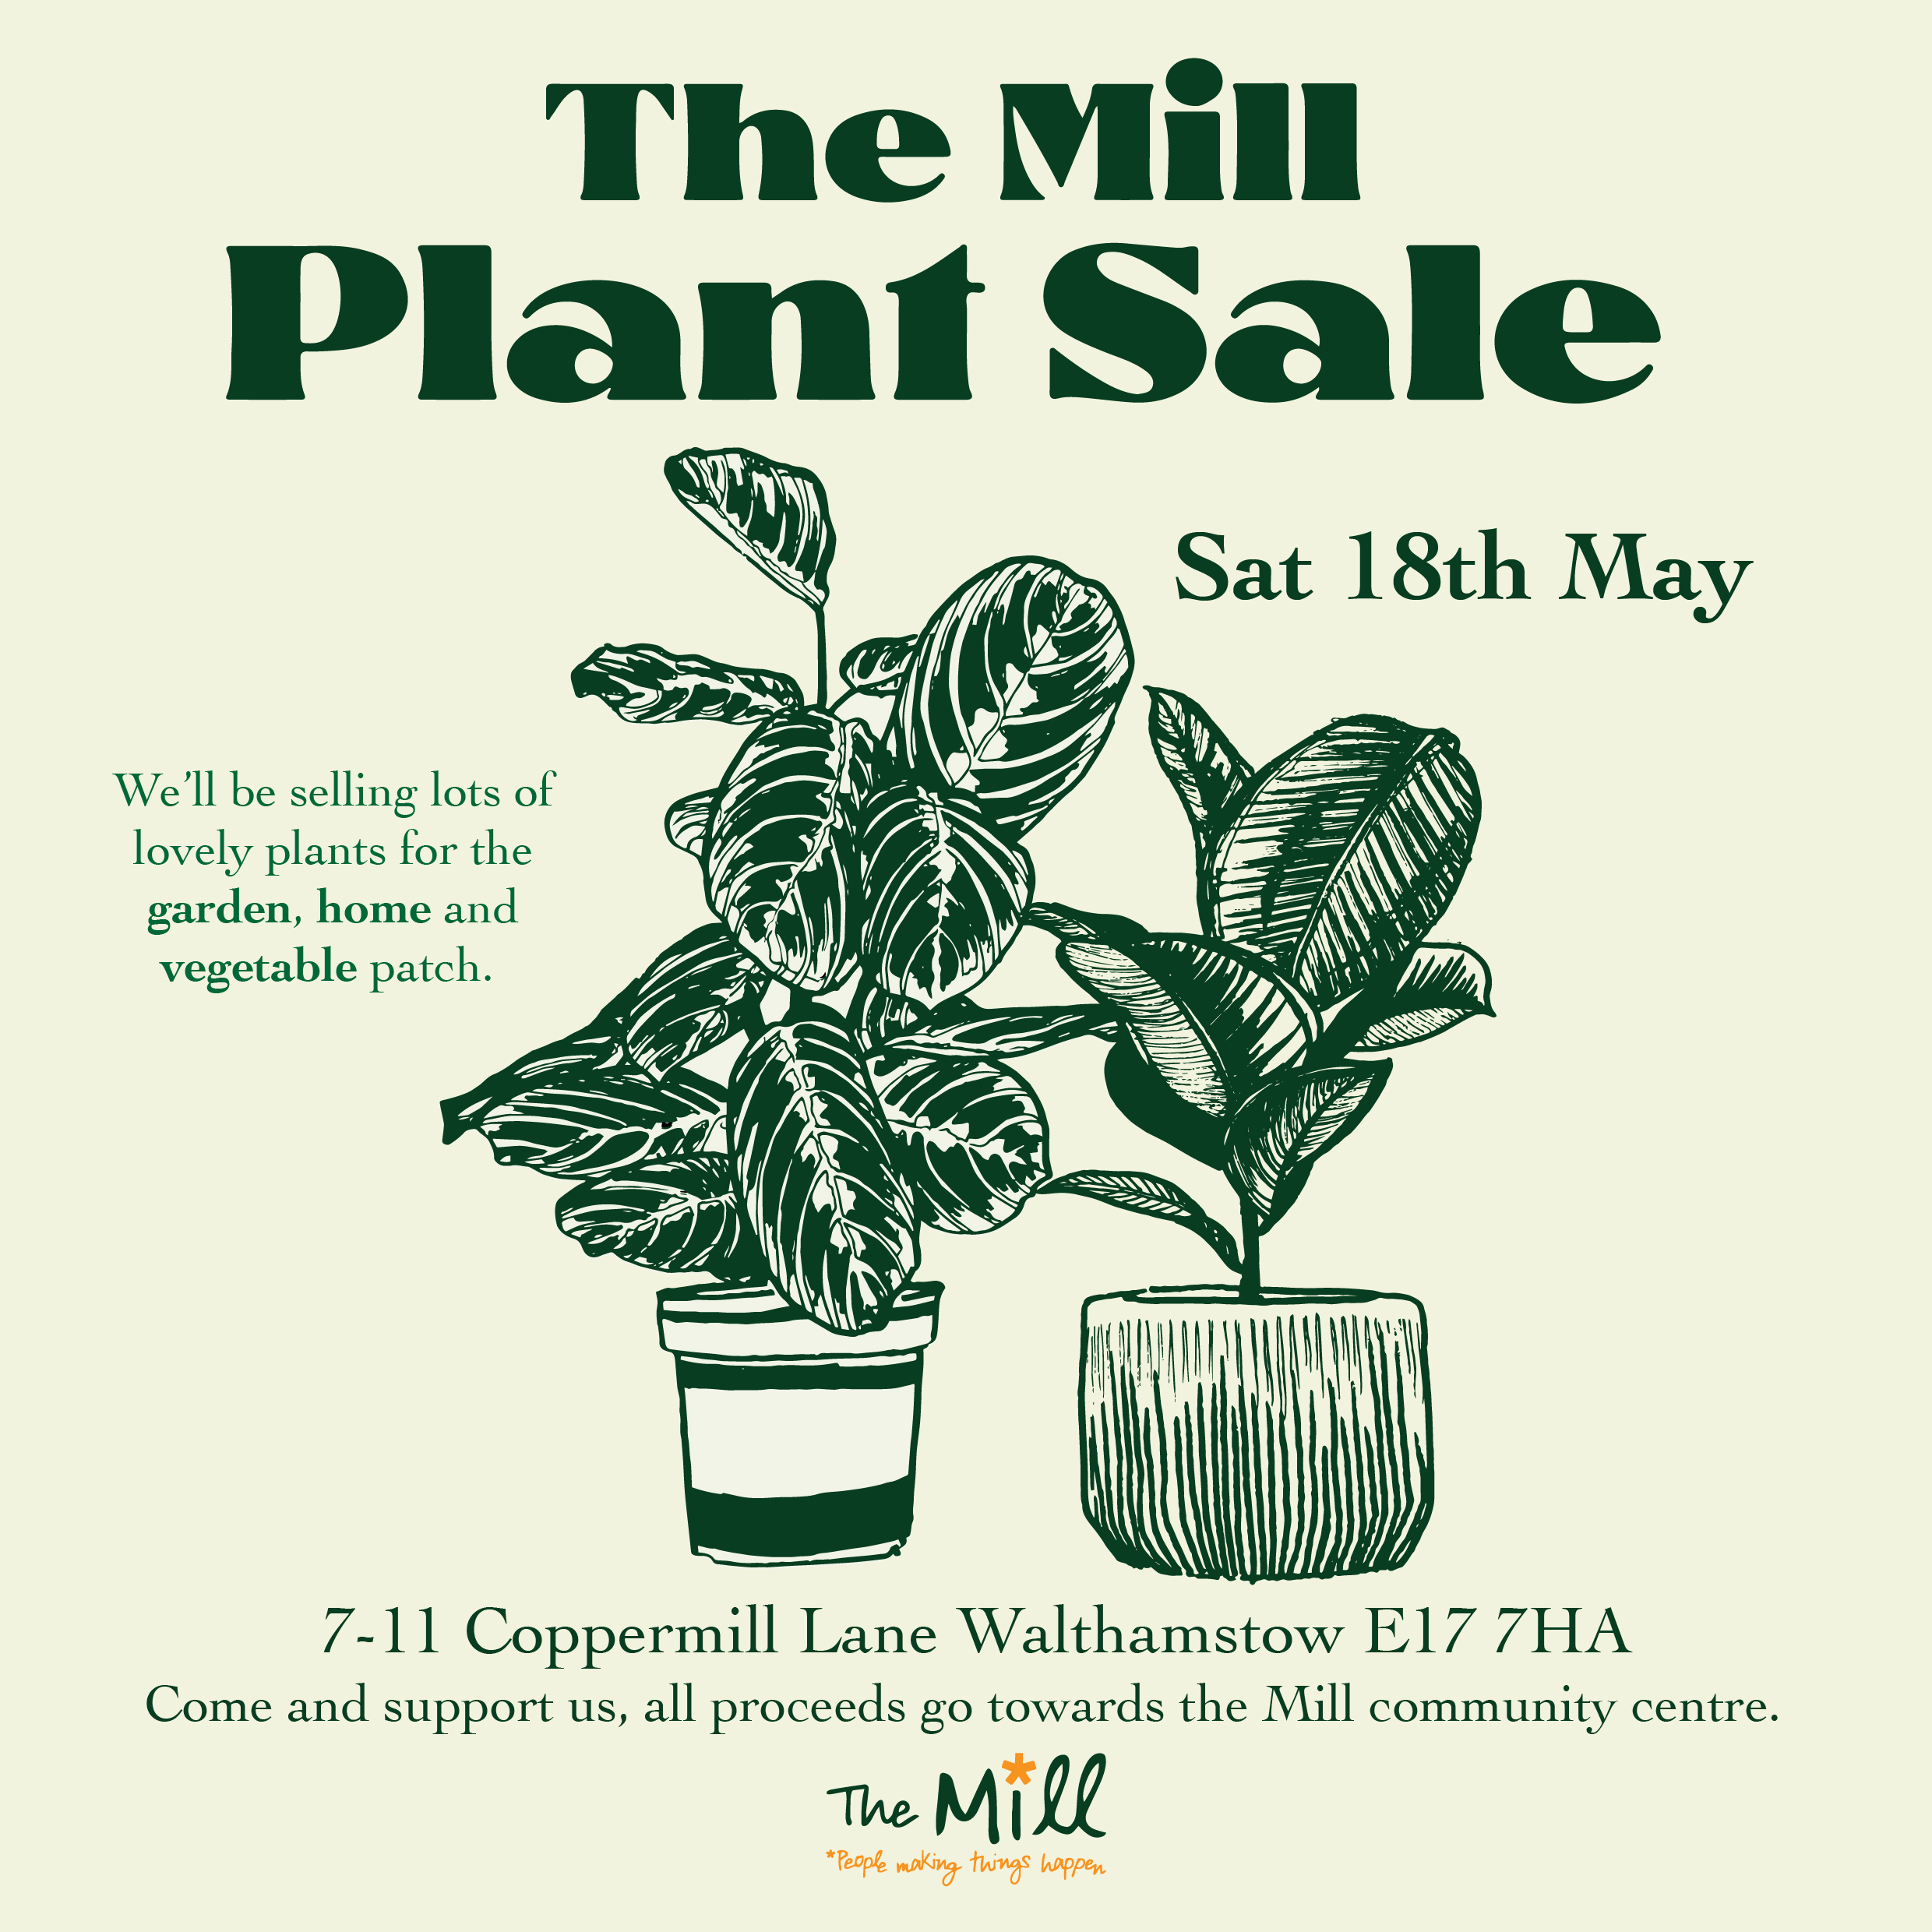 The Mill Plant Sale